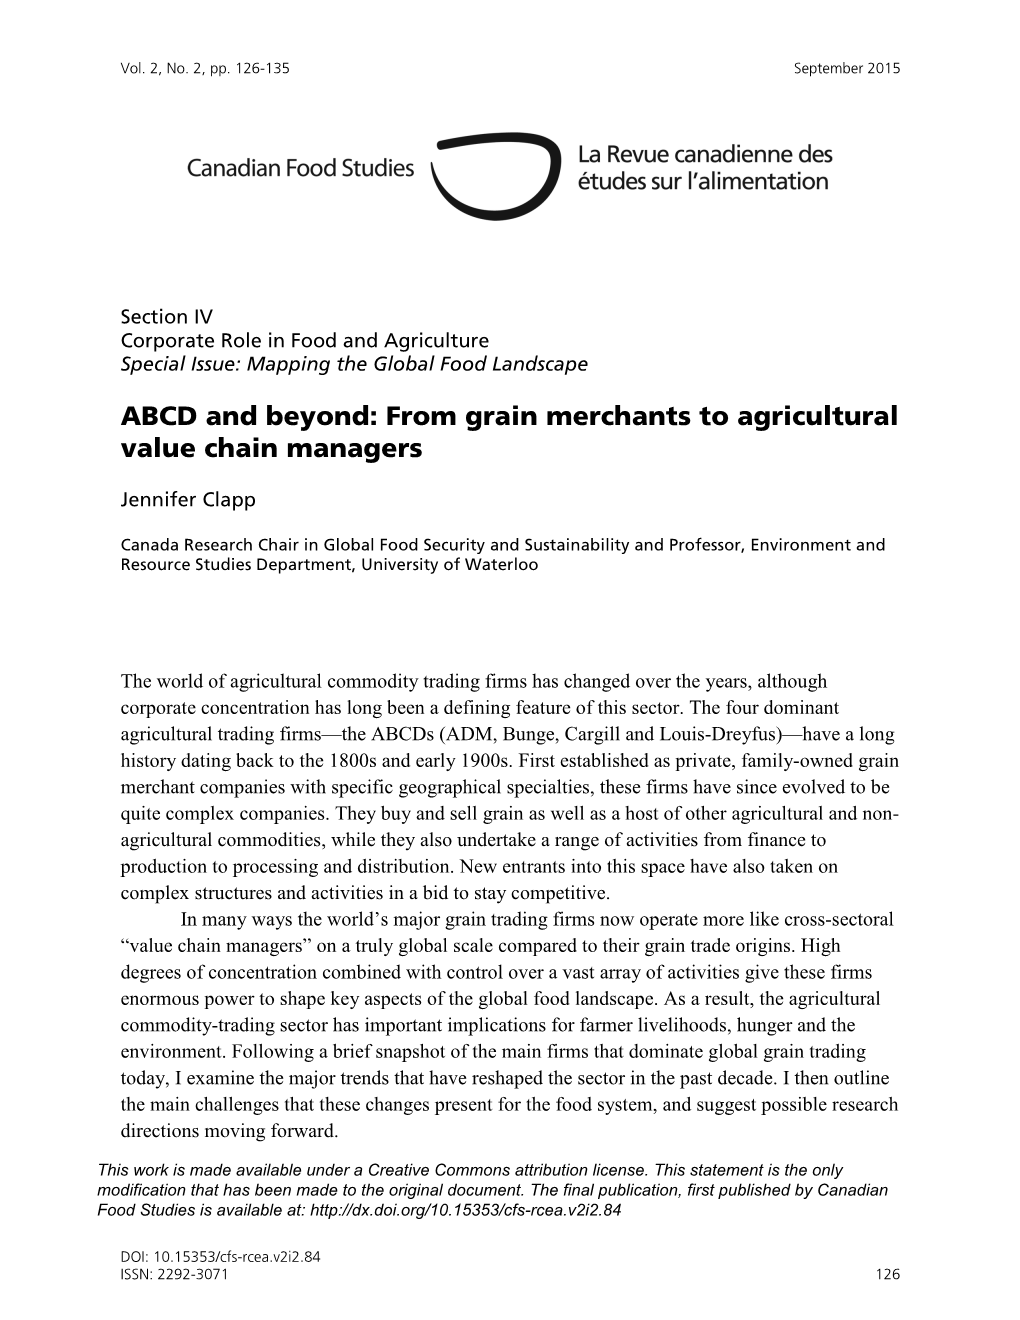 ABCD and Beyond: from Grain Merchants to Agricultural Value Chain Managers